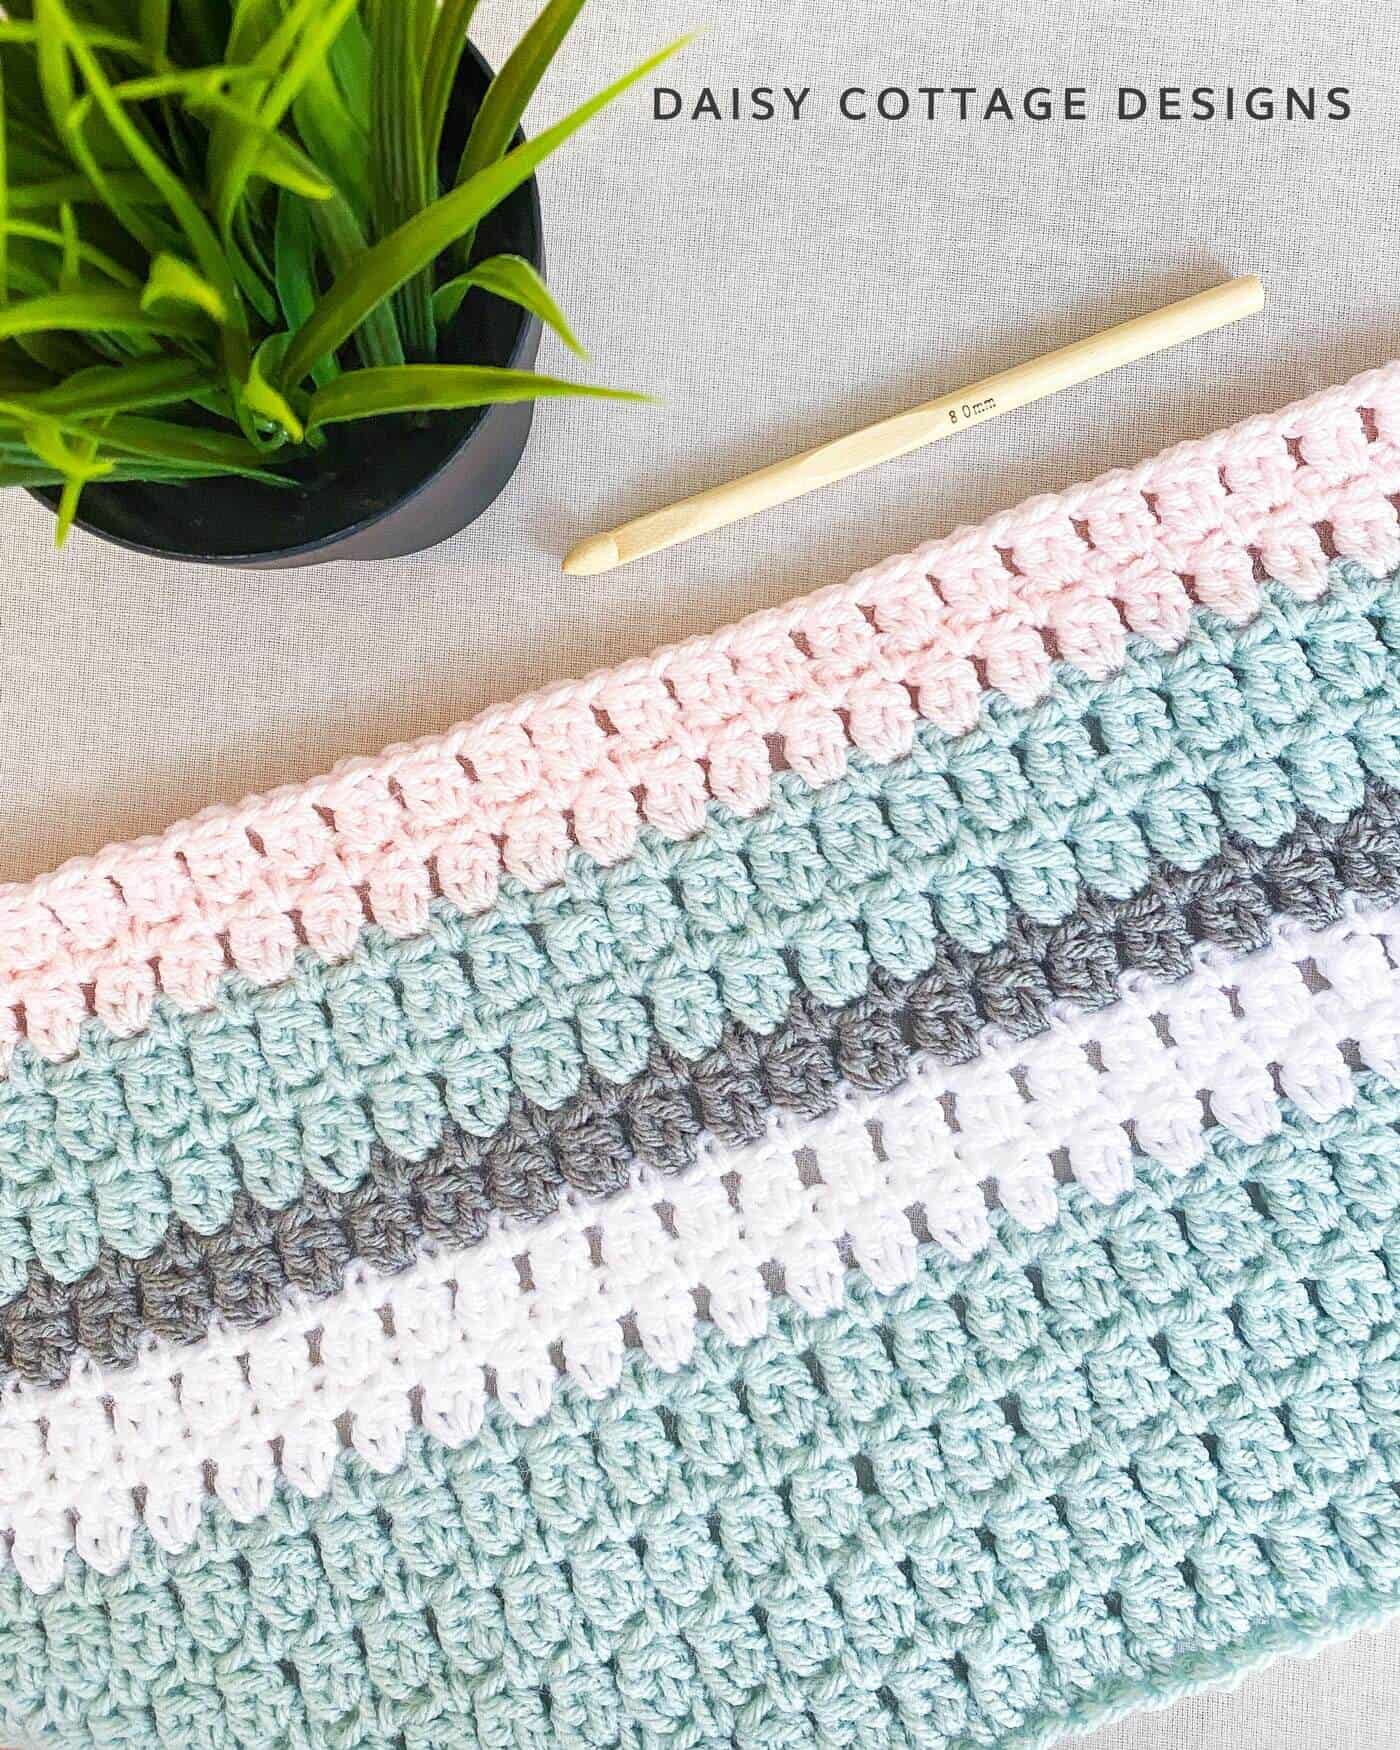 Learn how to make a double crochet cluster stitch using this crochet tutorial from Daisy Cottage Designs.